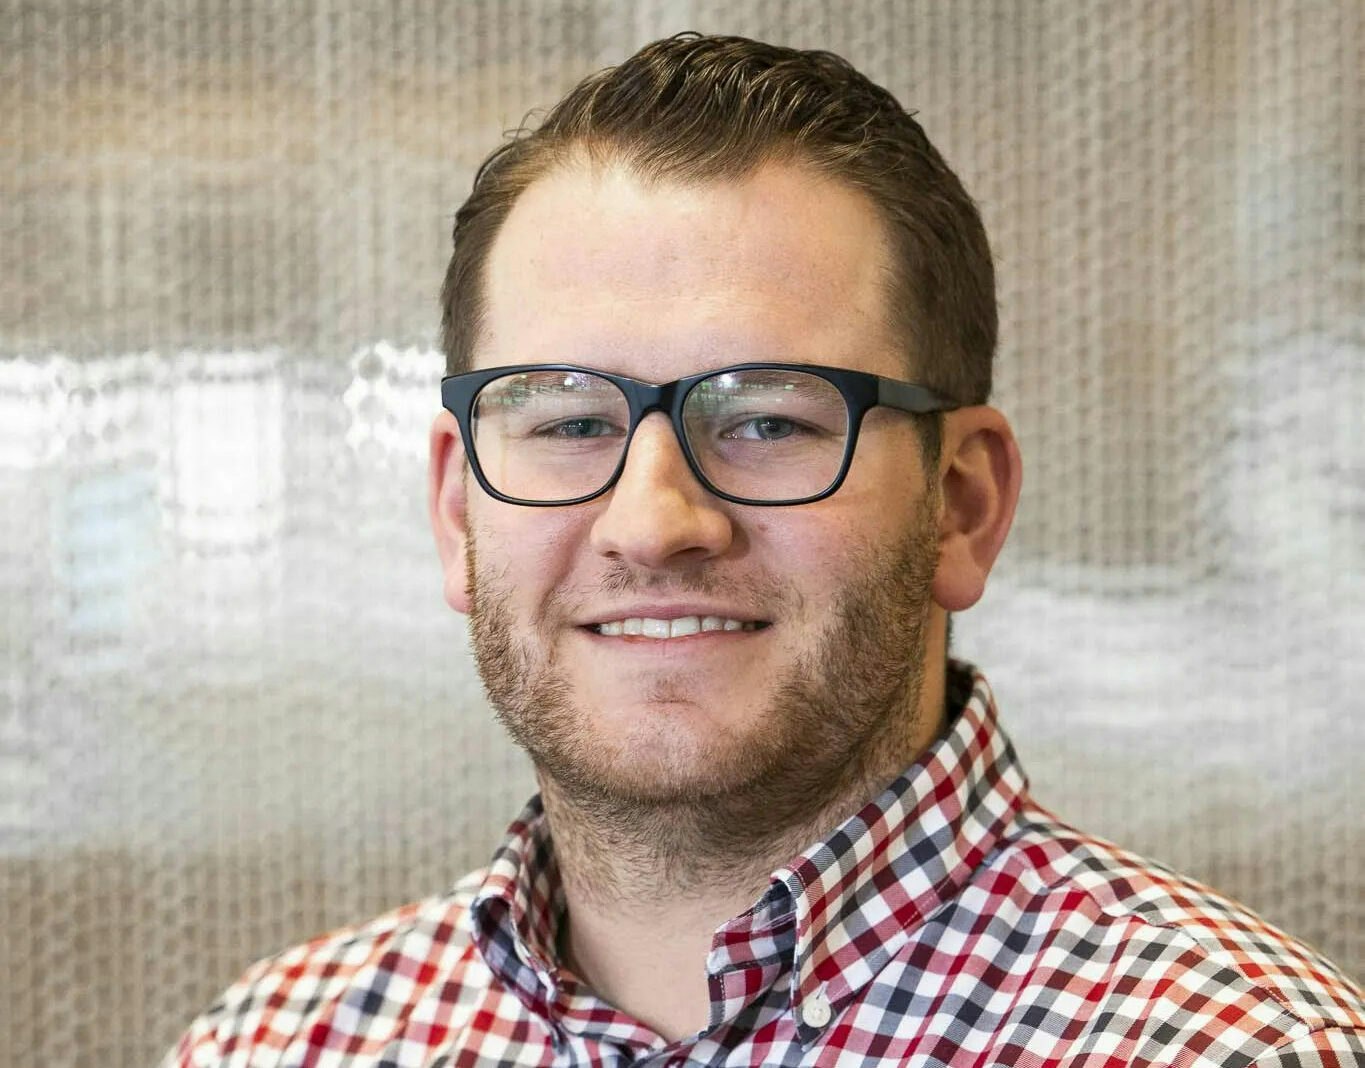 A smiling man with glasses and a beard is wearing a chequered blue, red and white shirt, and looking at the camera